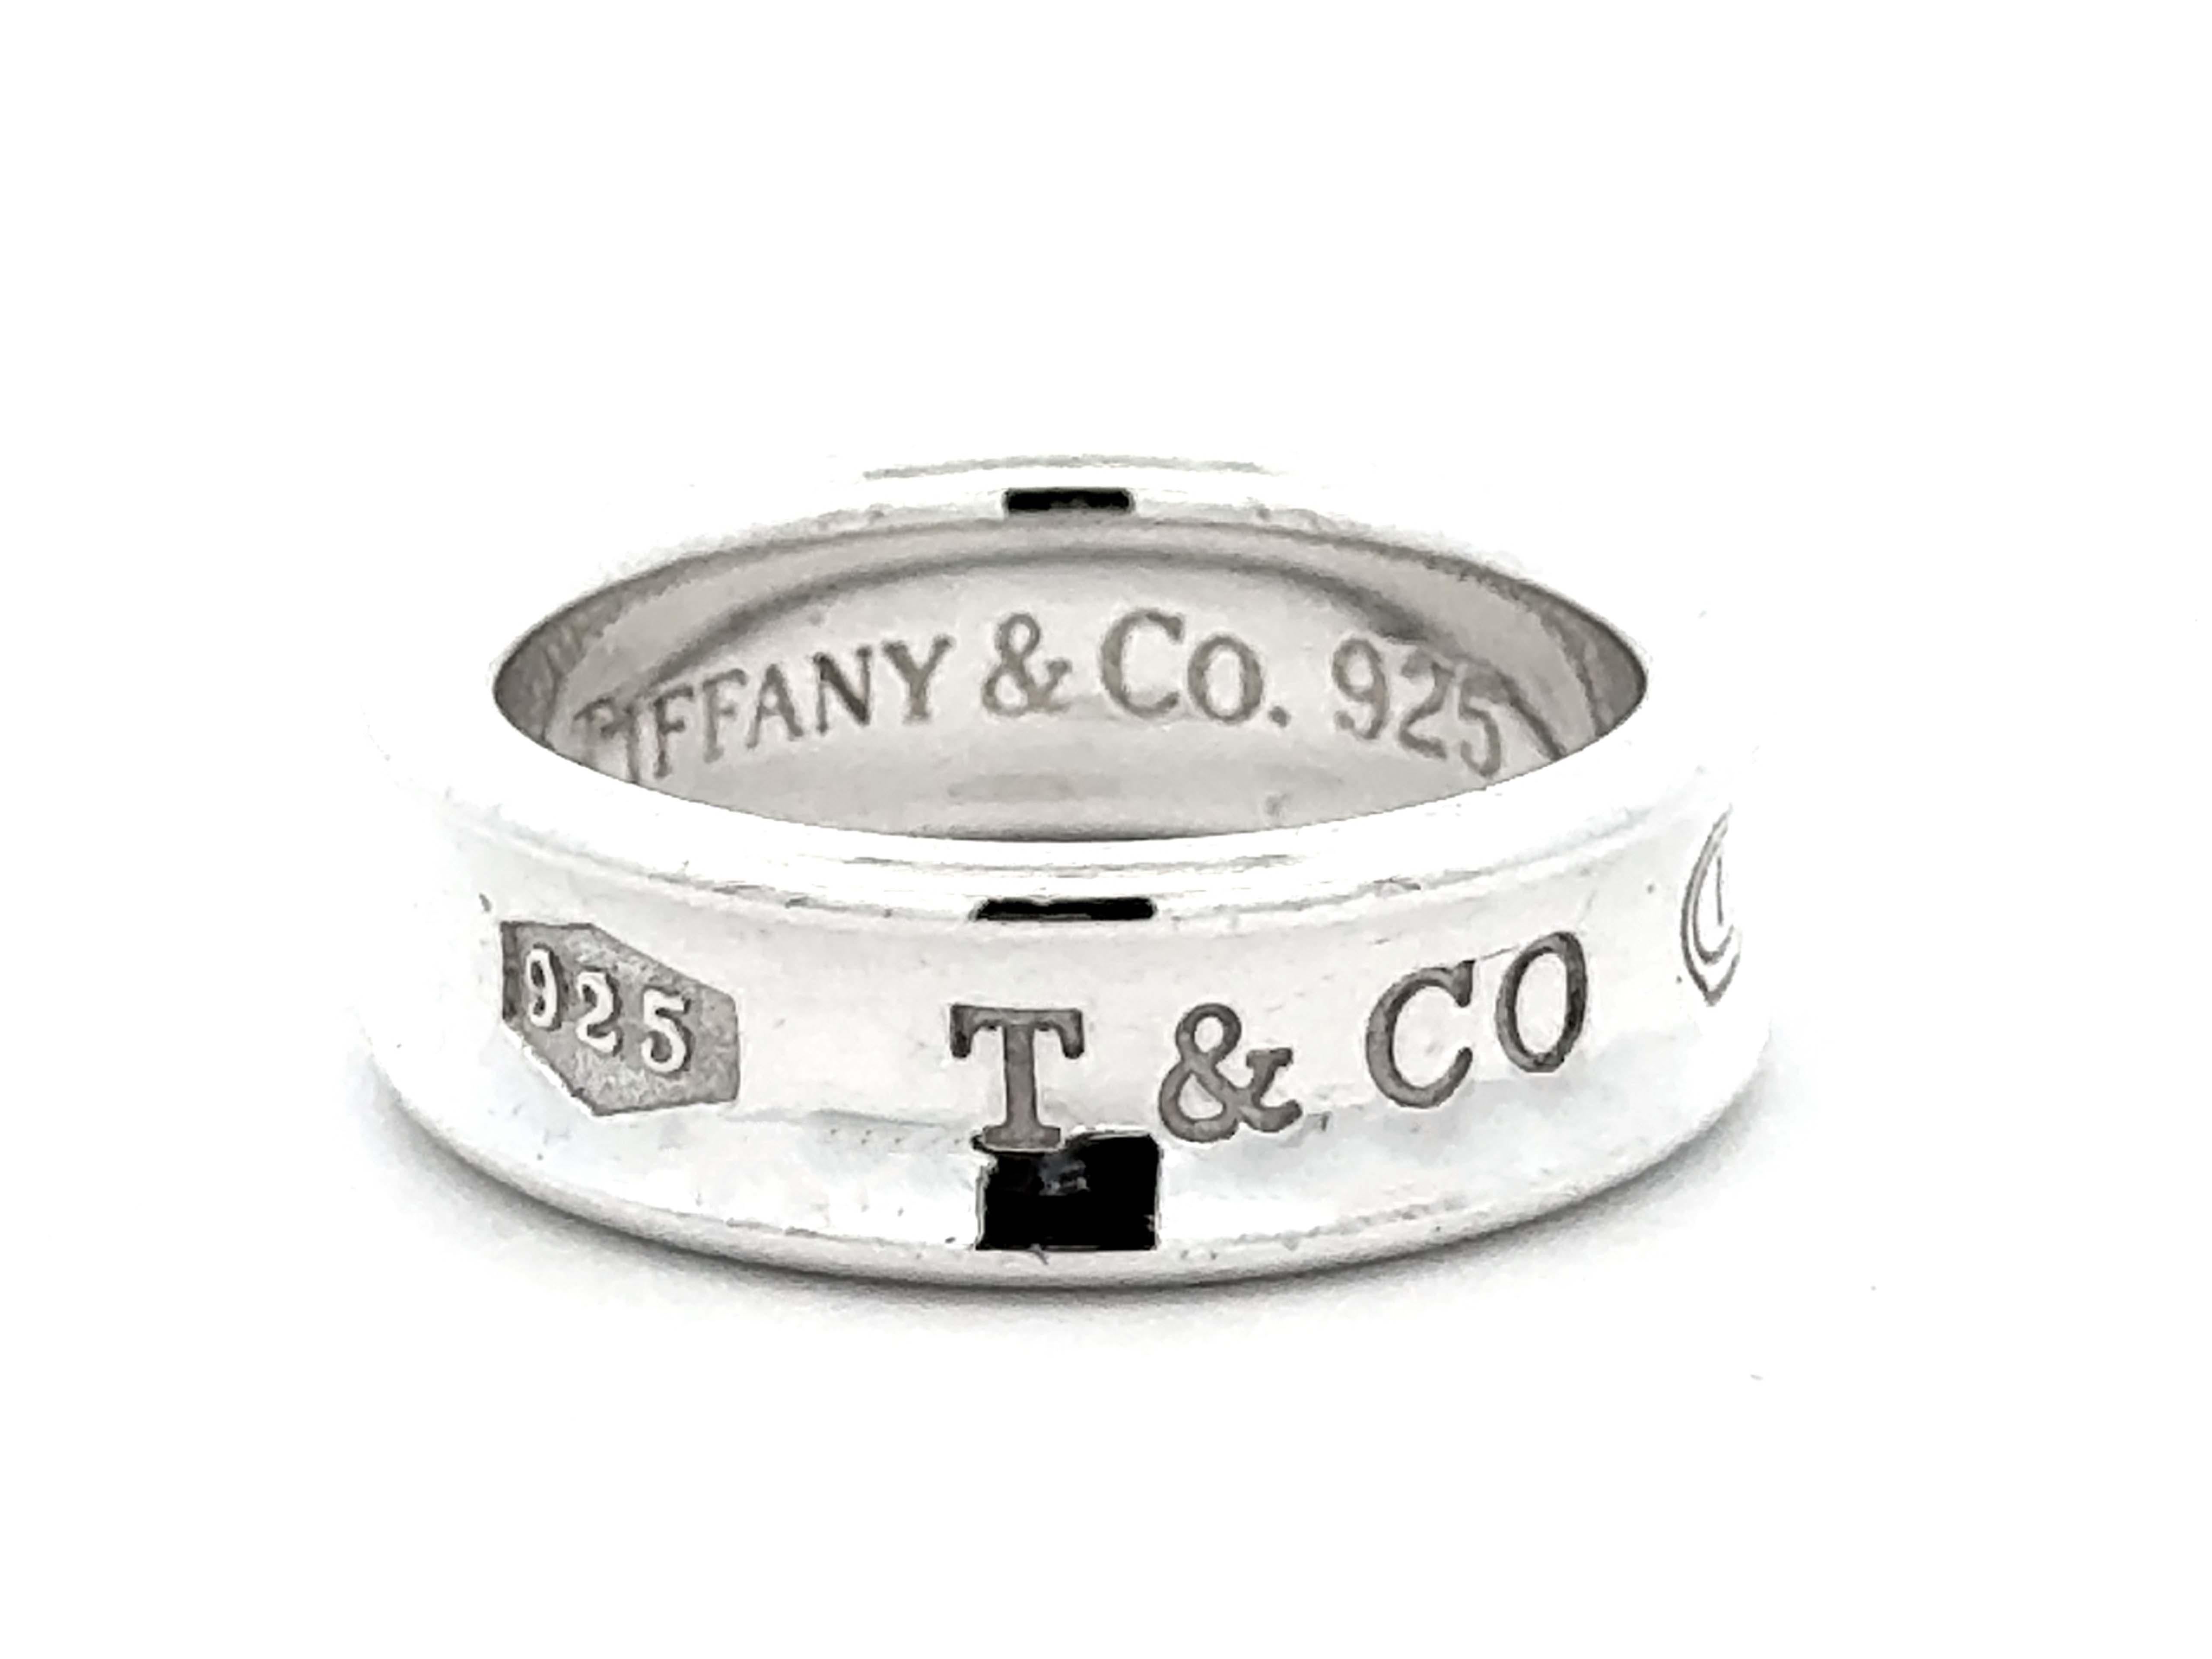 Tiffany & Co. 1837 Sterling Silver Ring In Excellent Condition For Sale In Honolulu, HI